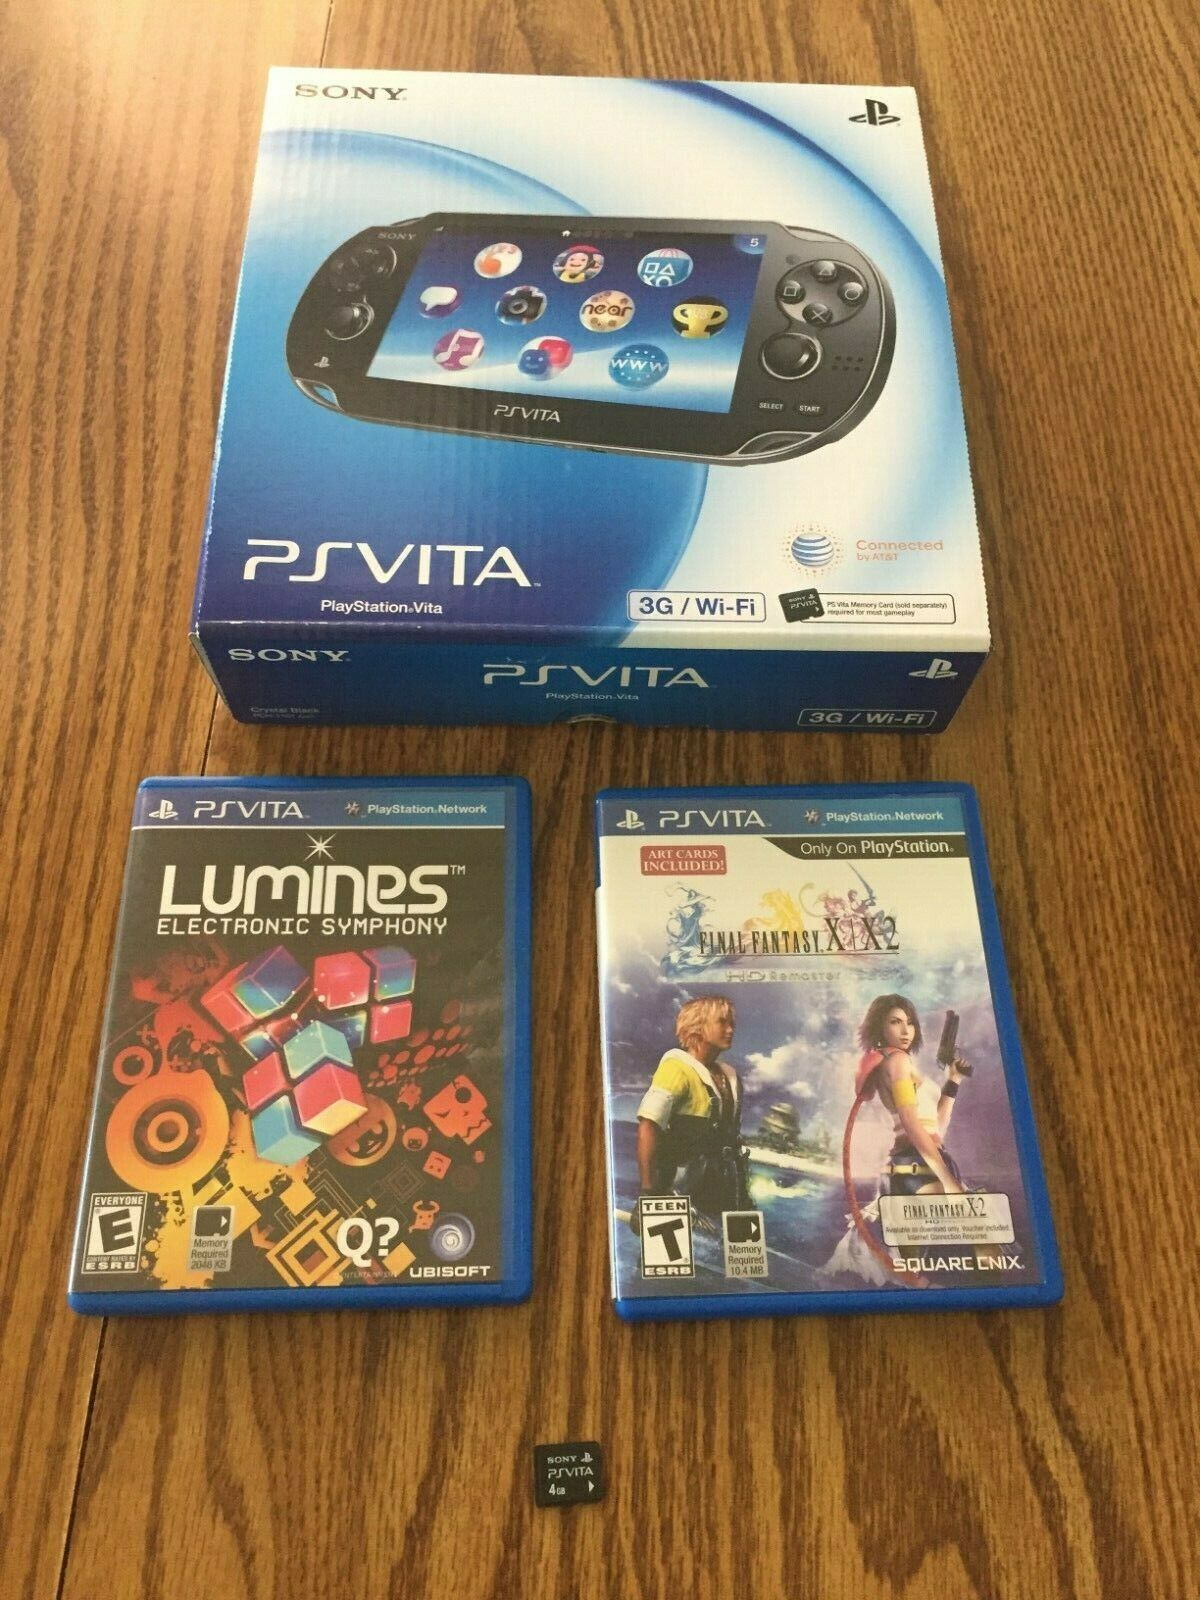 PS Vita Crystal Shaded First Model - PCH 1101 (WiFi + 3G) & Video games